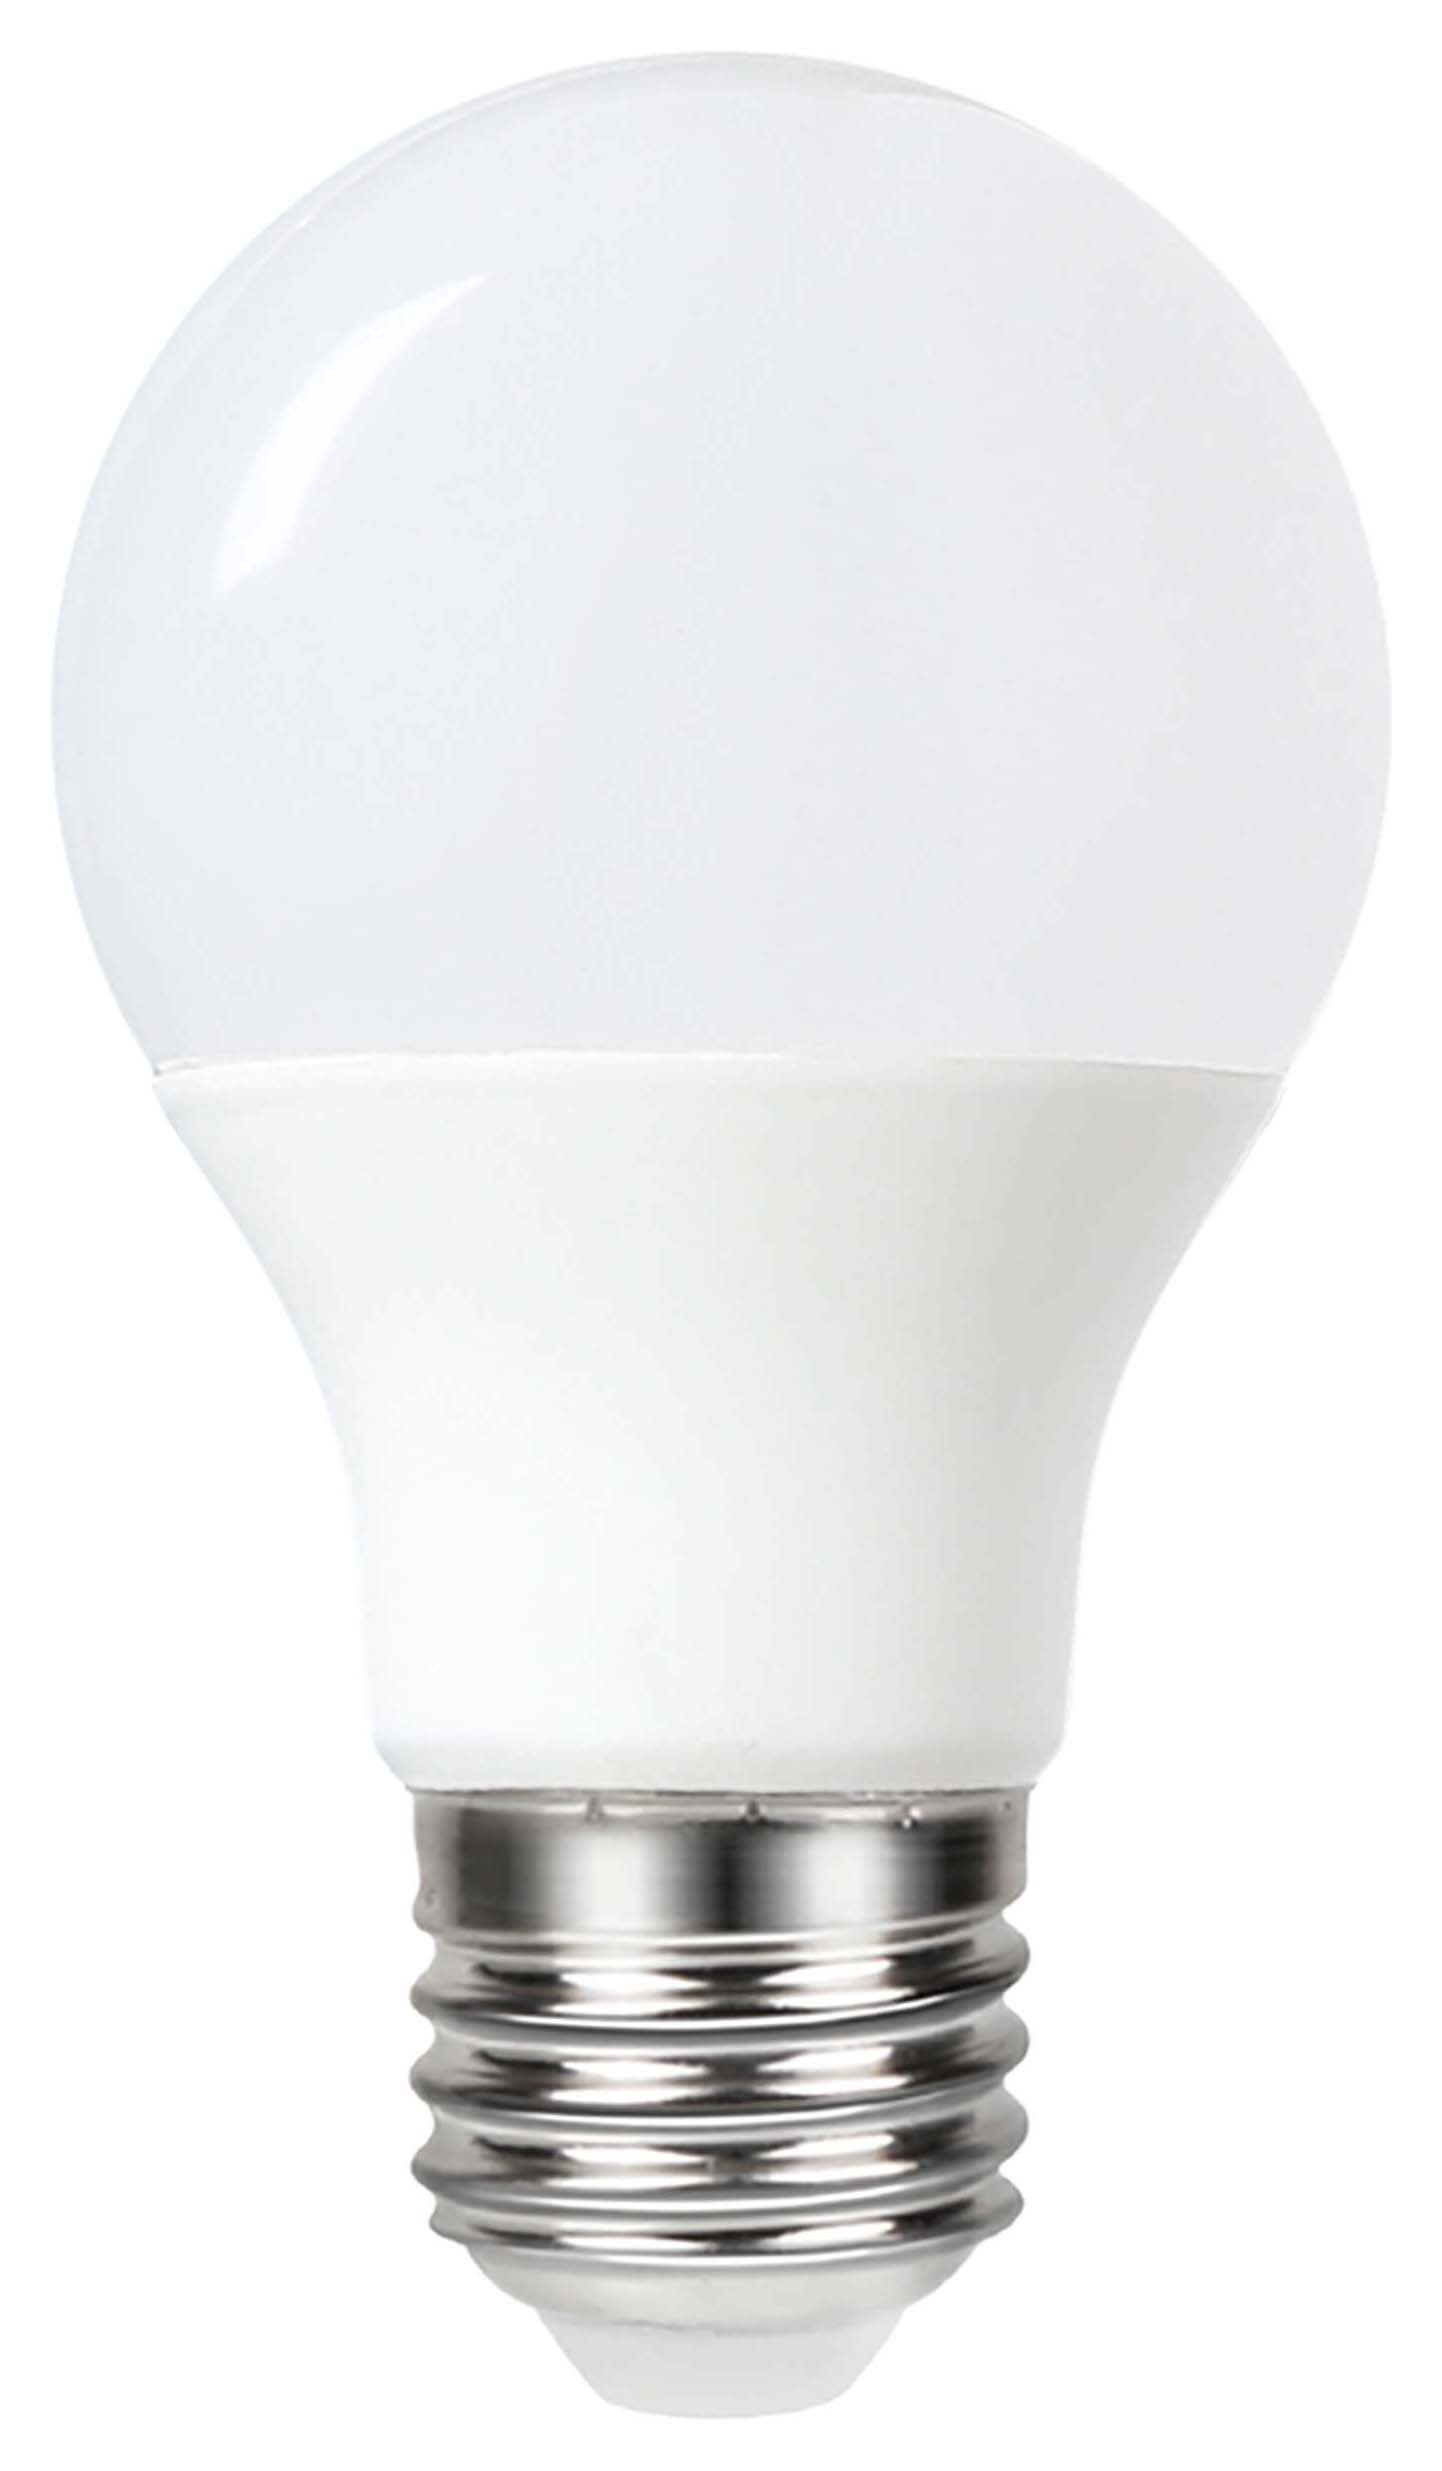 Image of Wickes Non-Dimmable GLS Opal LED E27 8.8W Warm White Light Bulb - Pack of 4